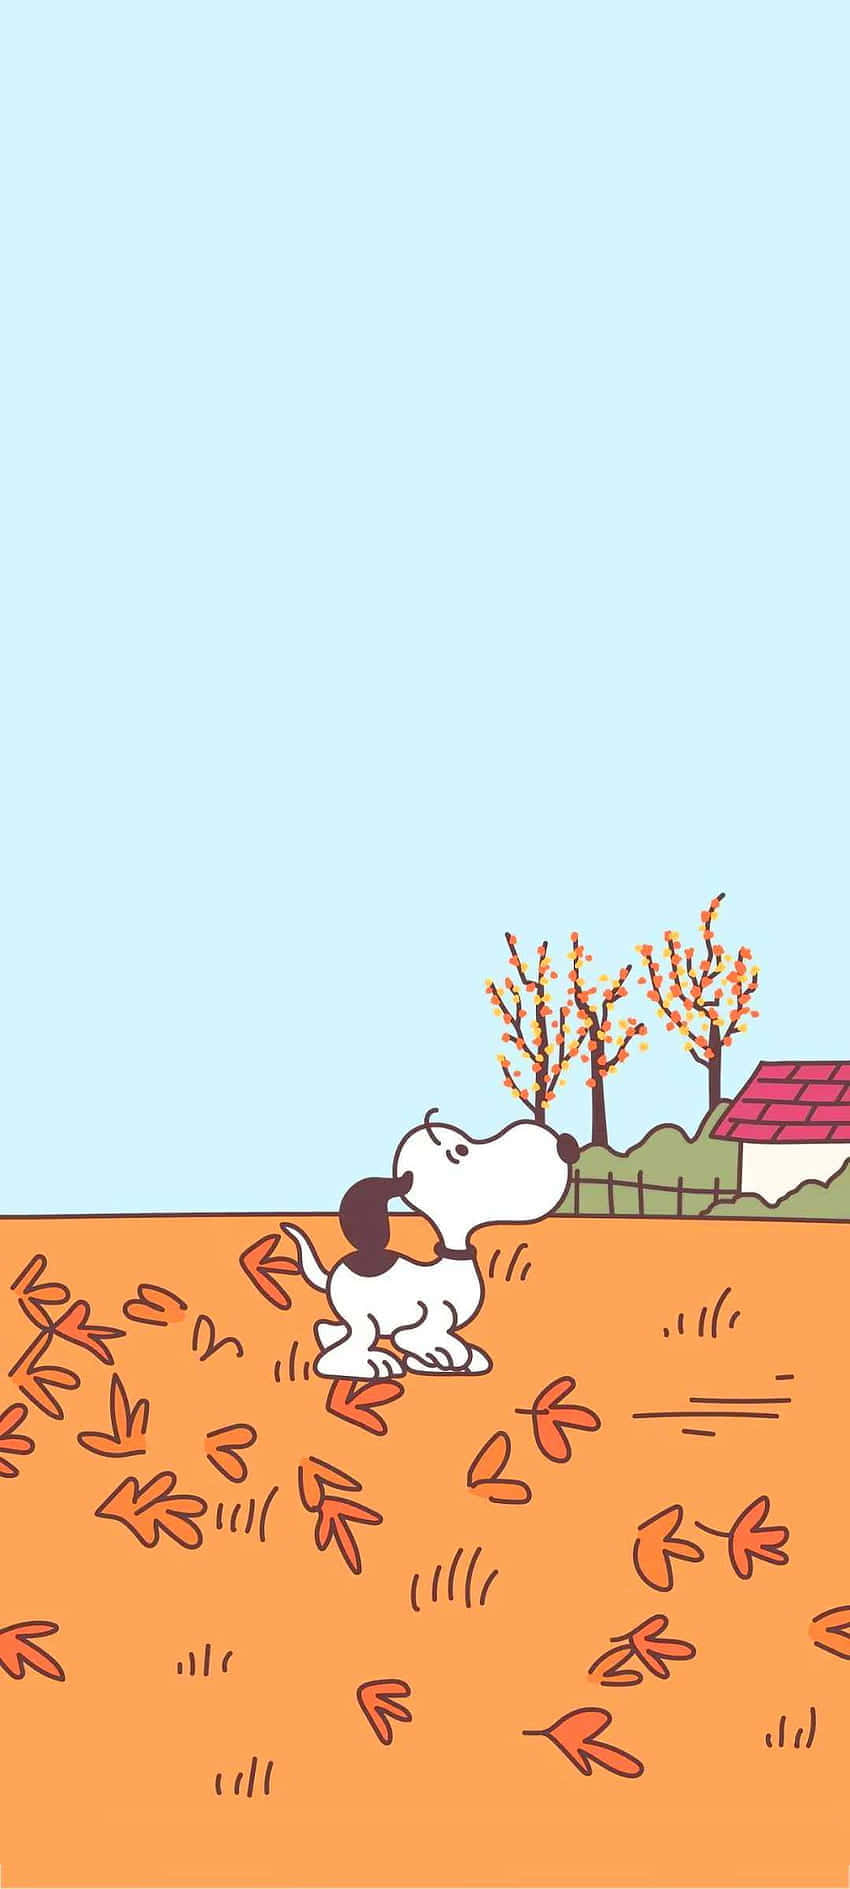 Fall into Autumn with Snoopy" Wallpaper